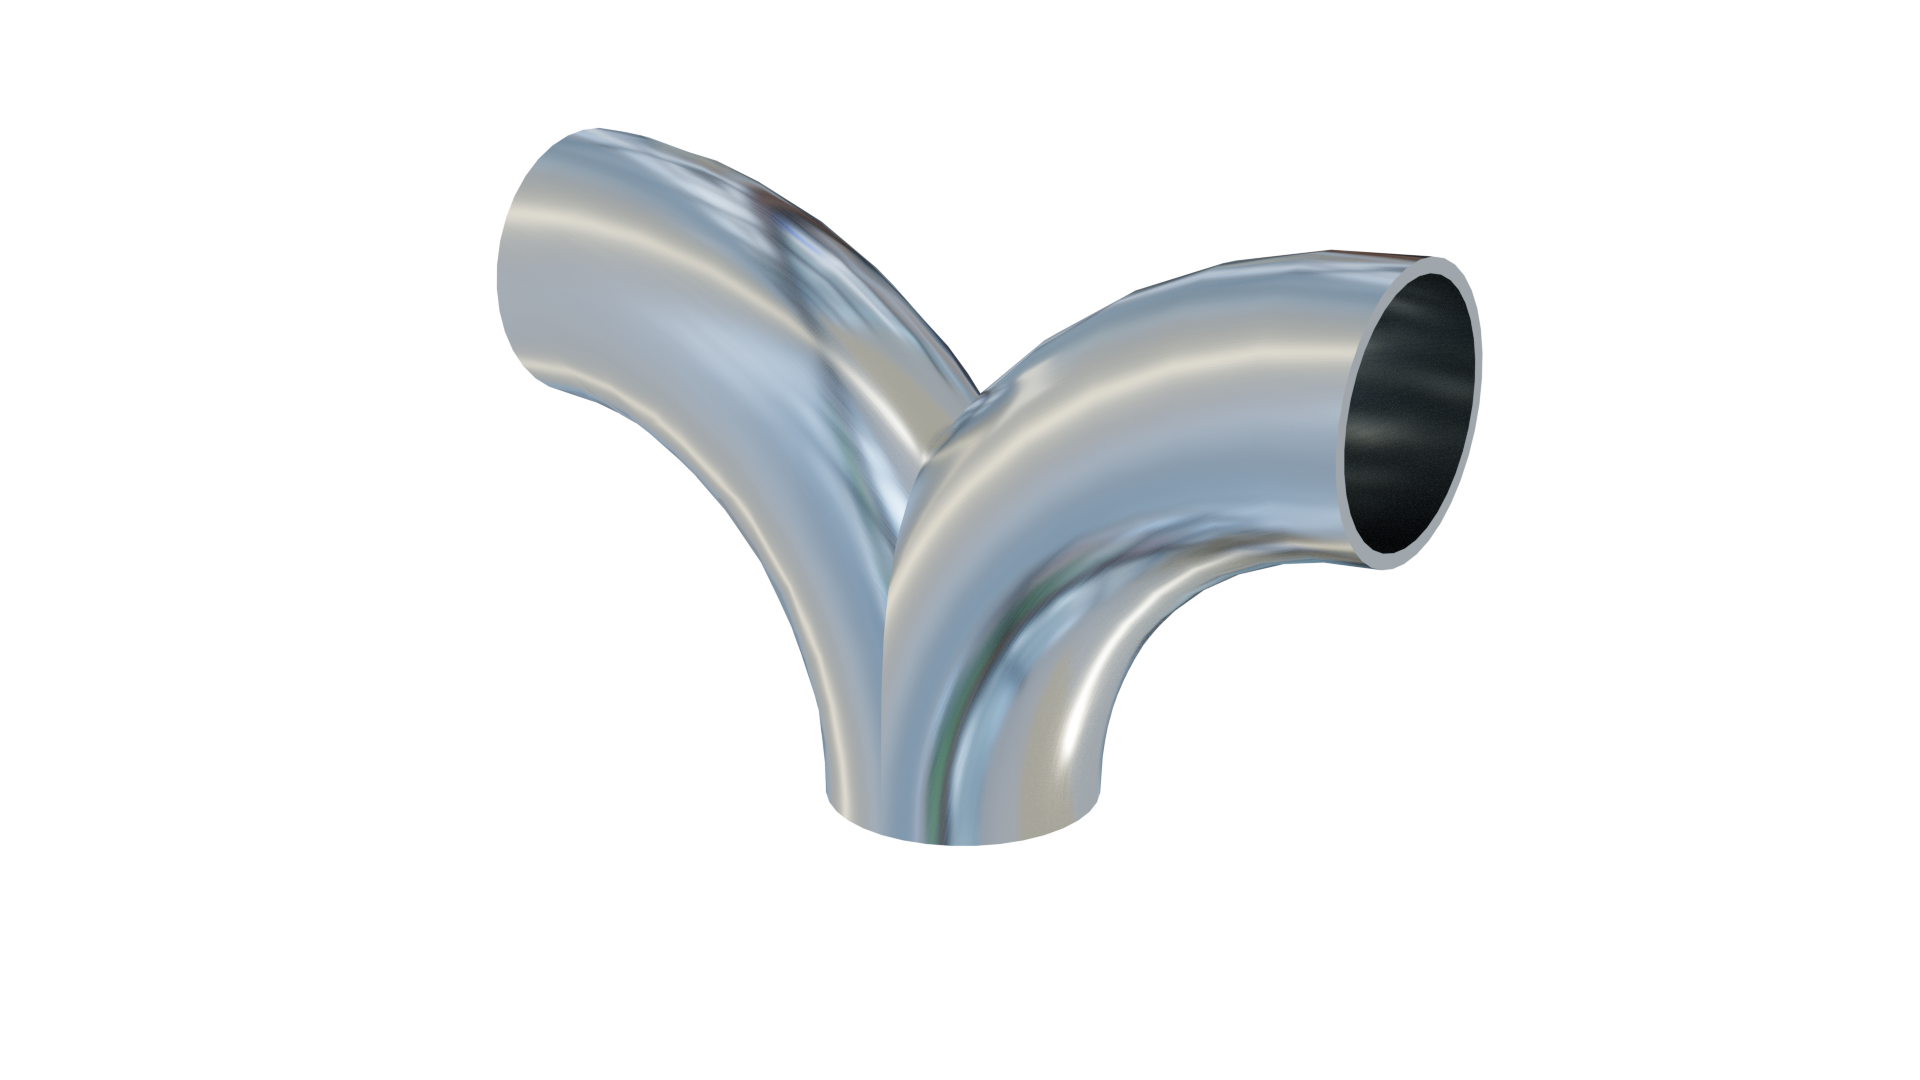 Double Tee bend 2" 304L polished